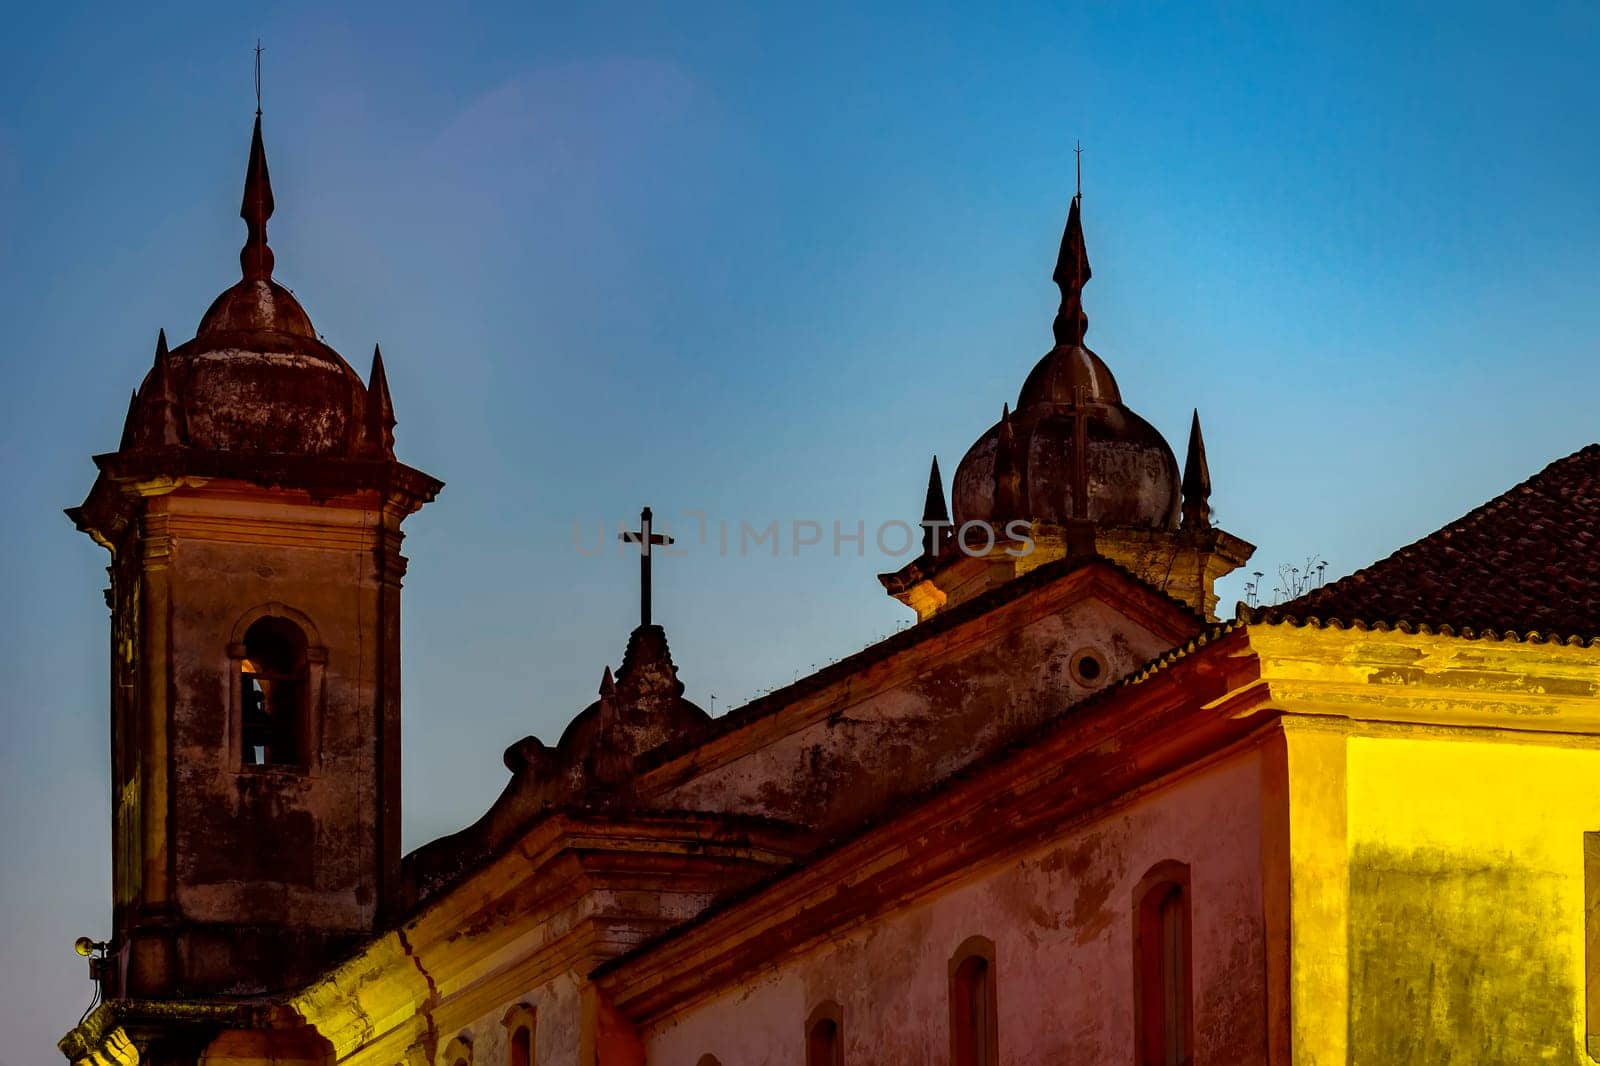 Back view at night of old and historic church by Fred_Pinheiro